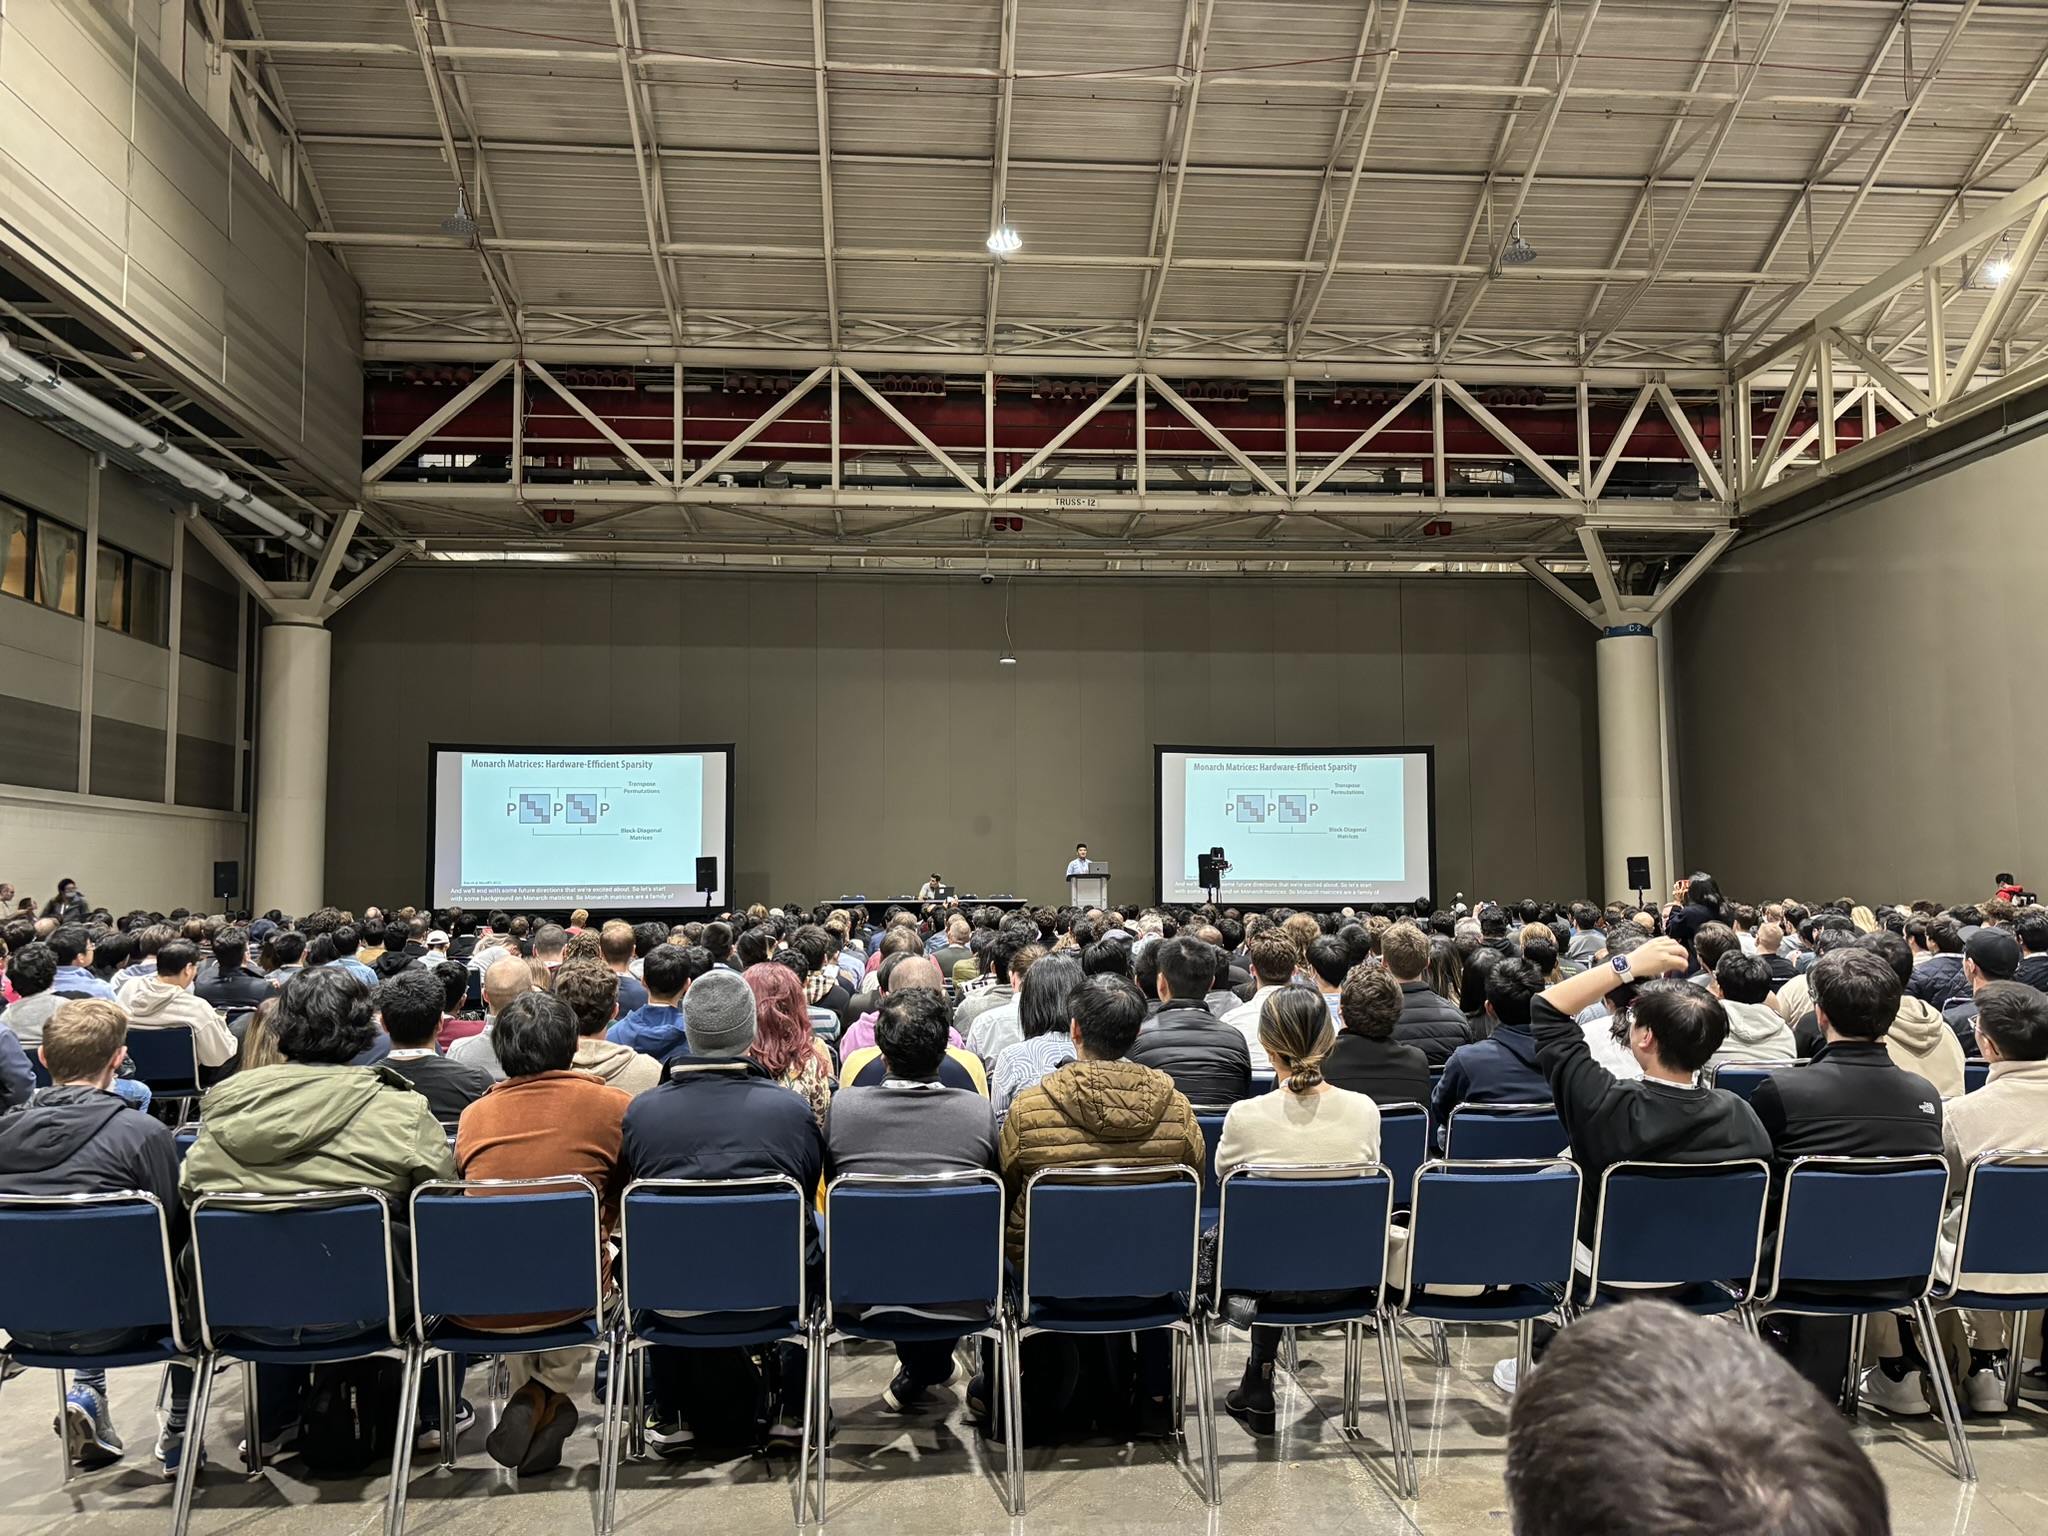 A large crowd watching one of the efficient learning talks